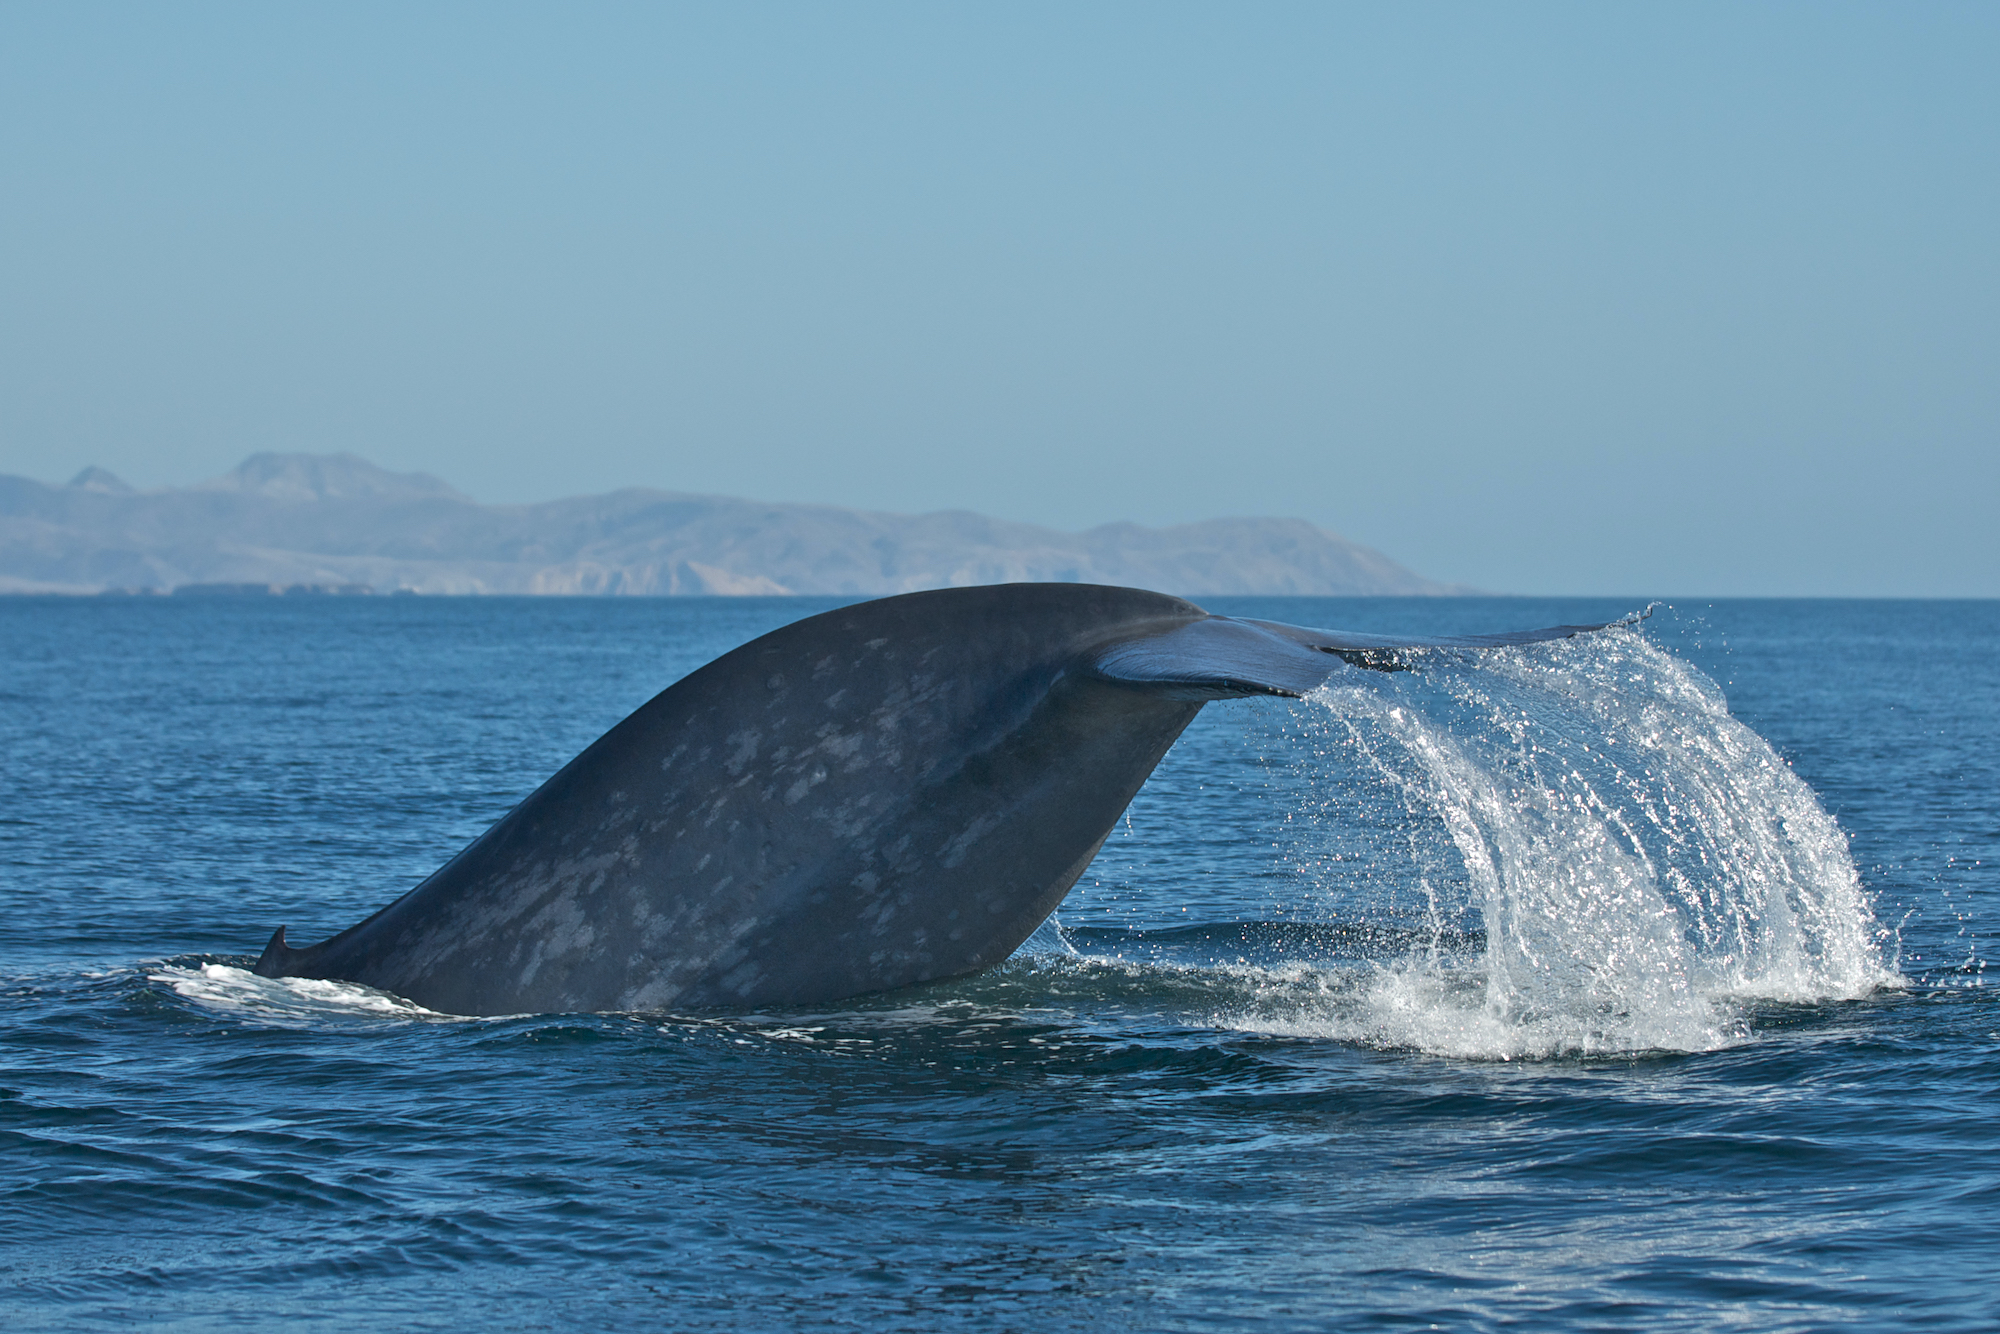 Whale ‘roadkill’ is on the rise off California. A new detection system could help.